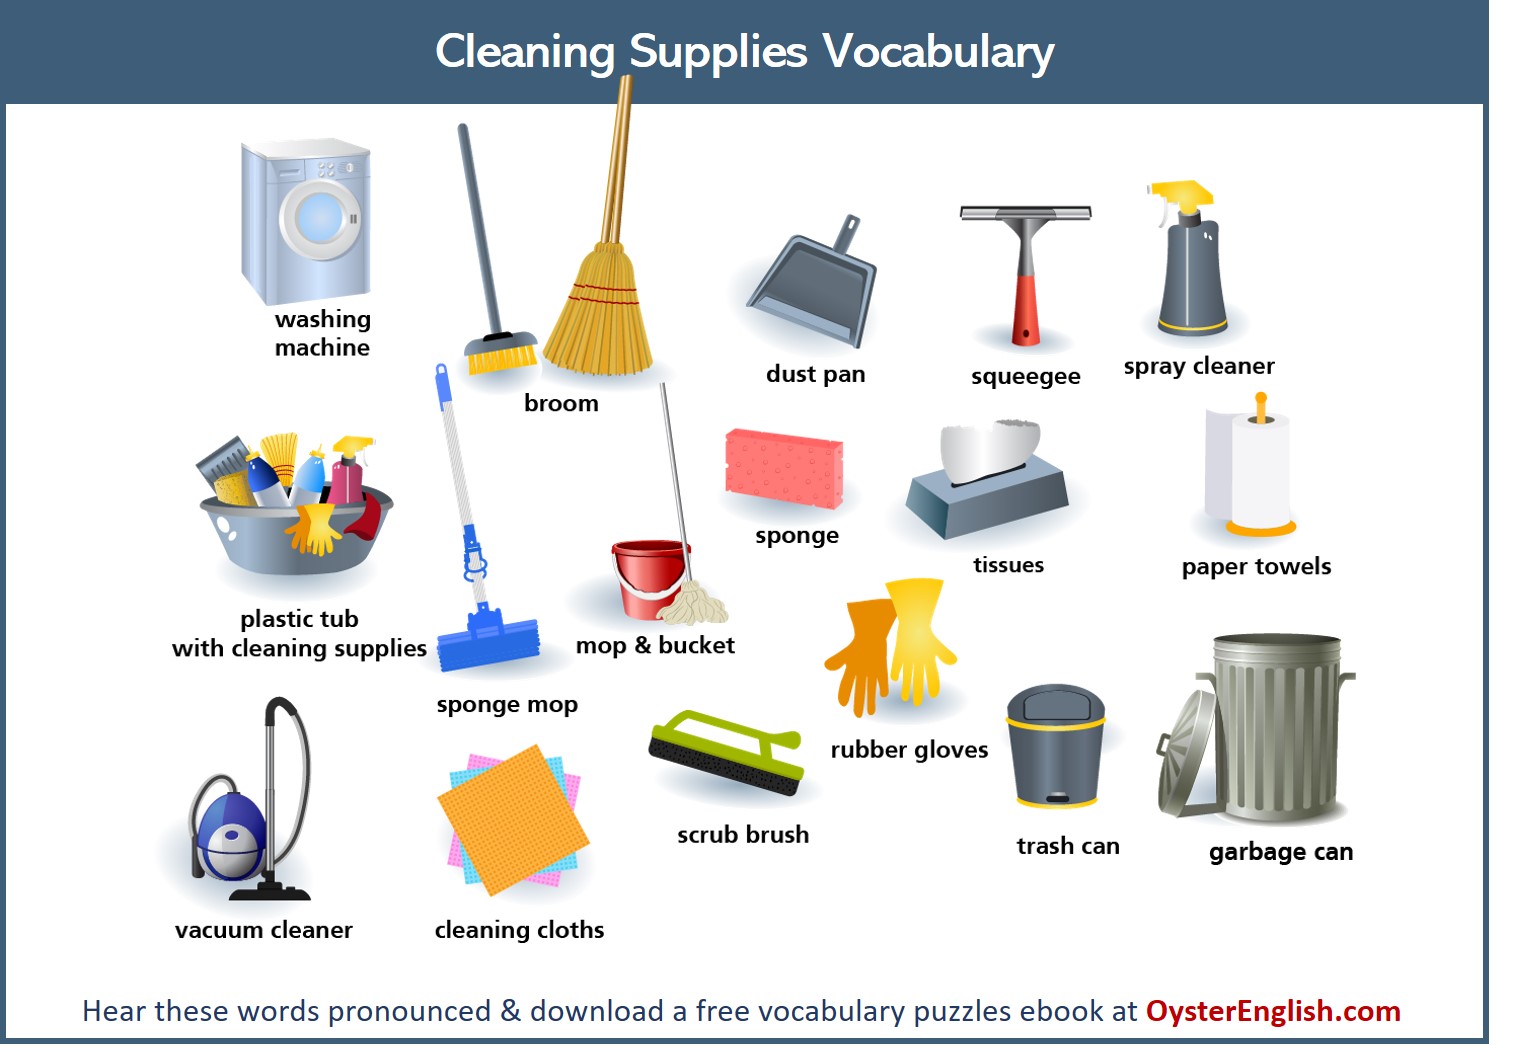 https://www.oysterenglish.com/images/cleaning-supplies-vocabulary.jpg